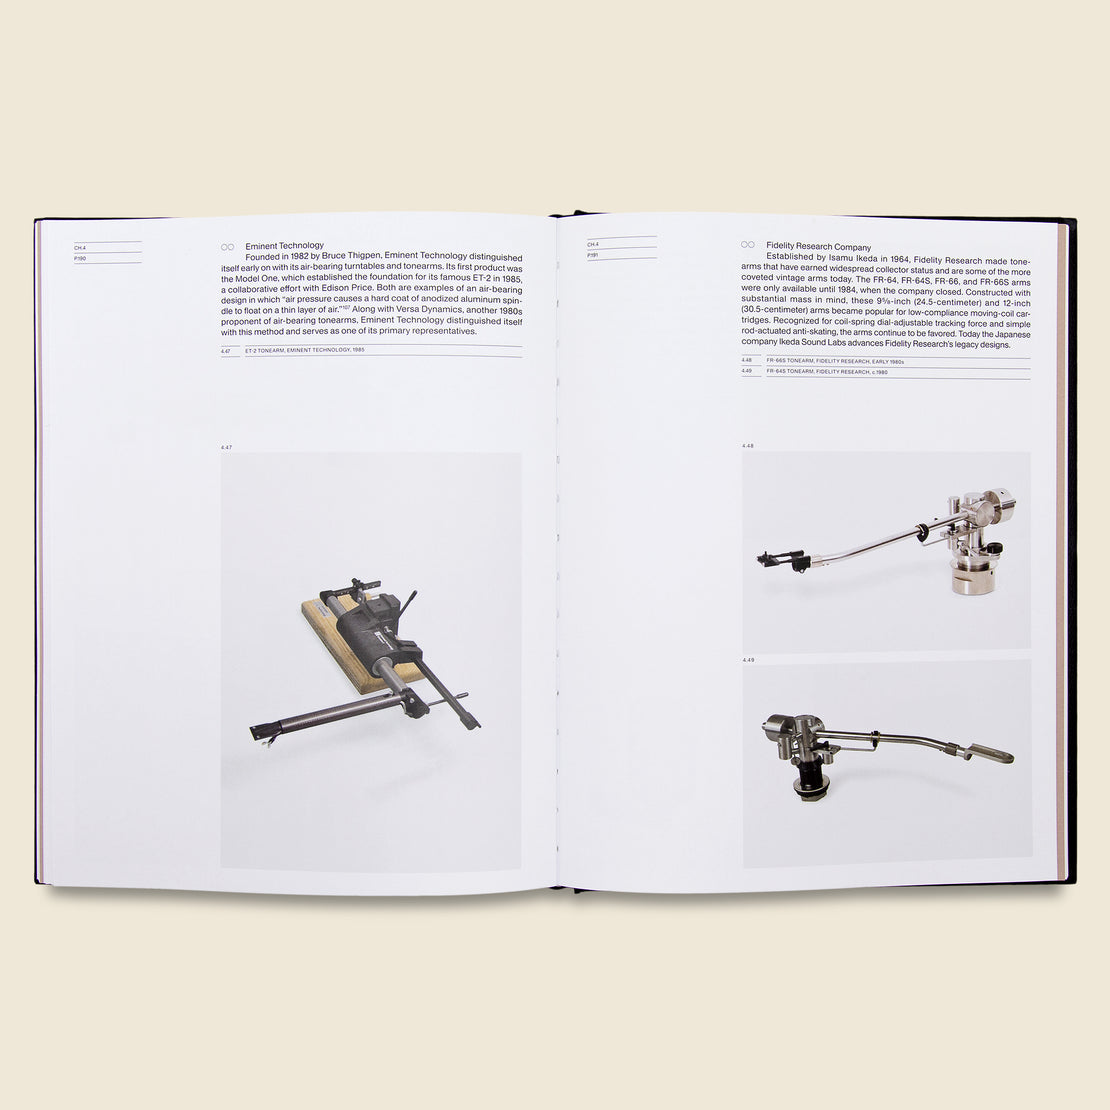 Revolution: The History of Turntable Design - Bookstore - STAG Provisions - Home - Library - Book